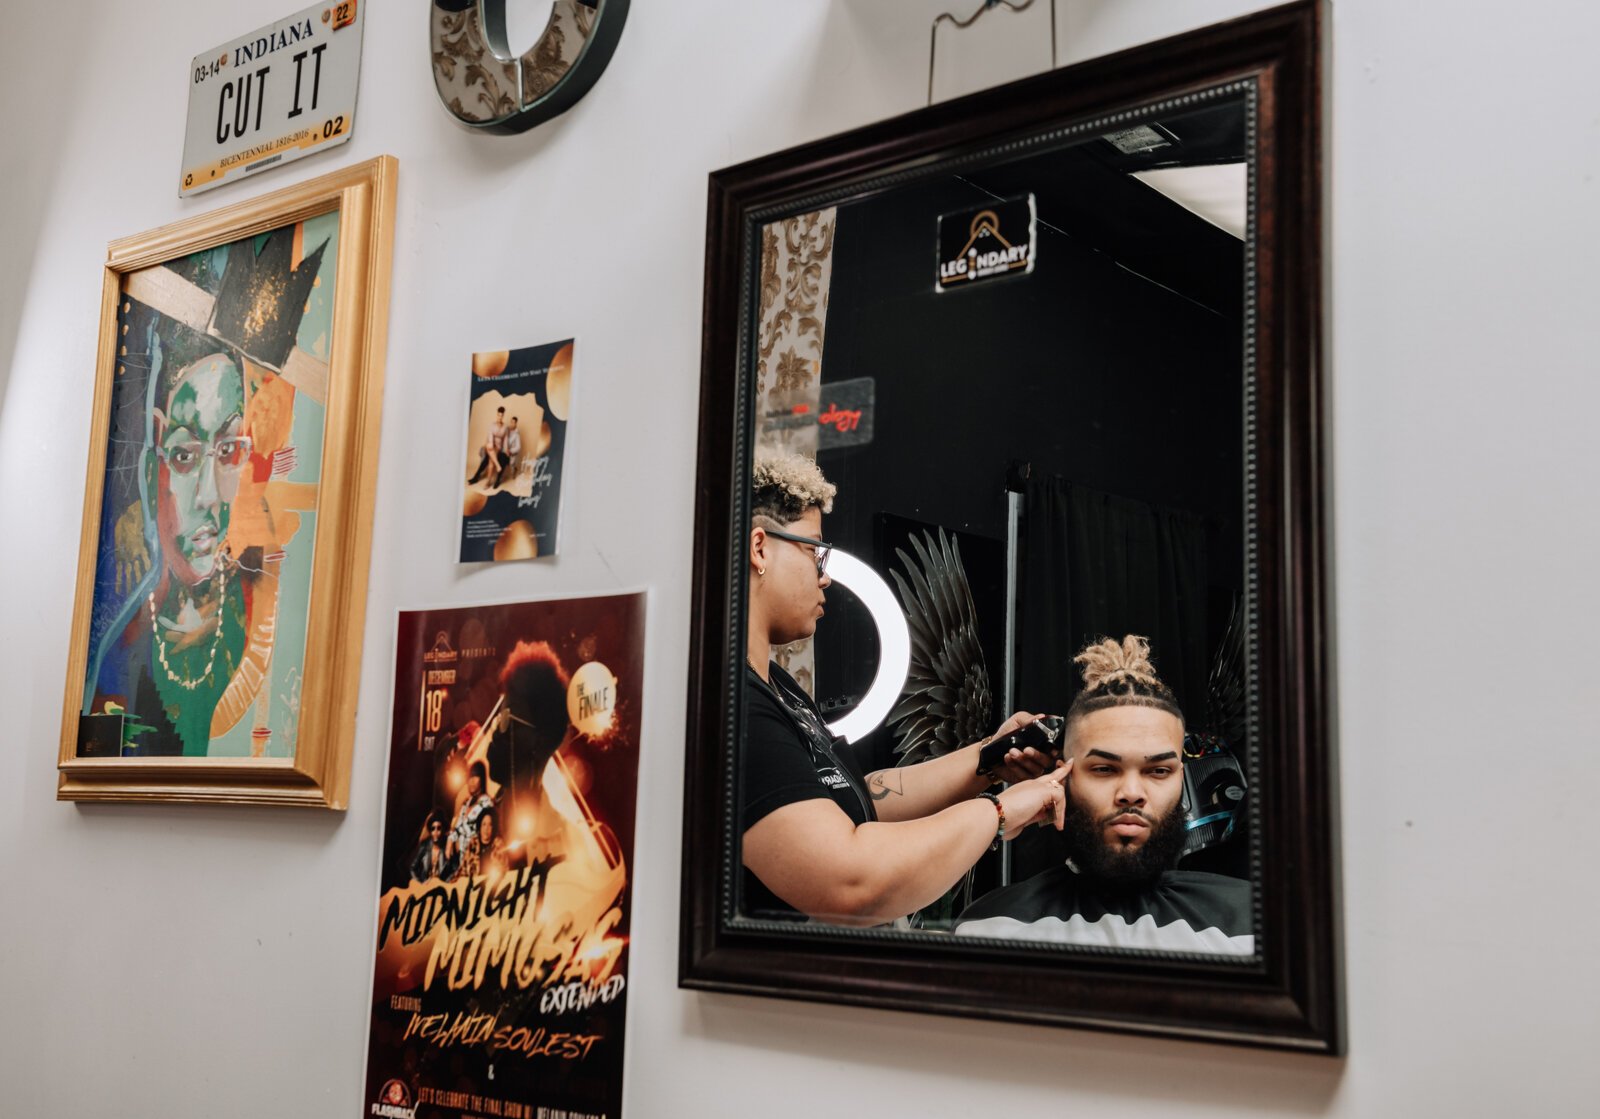 Sasha Chaney, Master Barber and Owner of Legendary Barber Lounge works on giving fellow barber Marcus Chezem a high ball fade with a beard edge up.